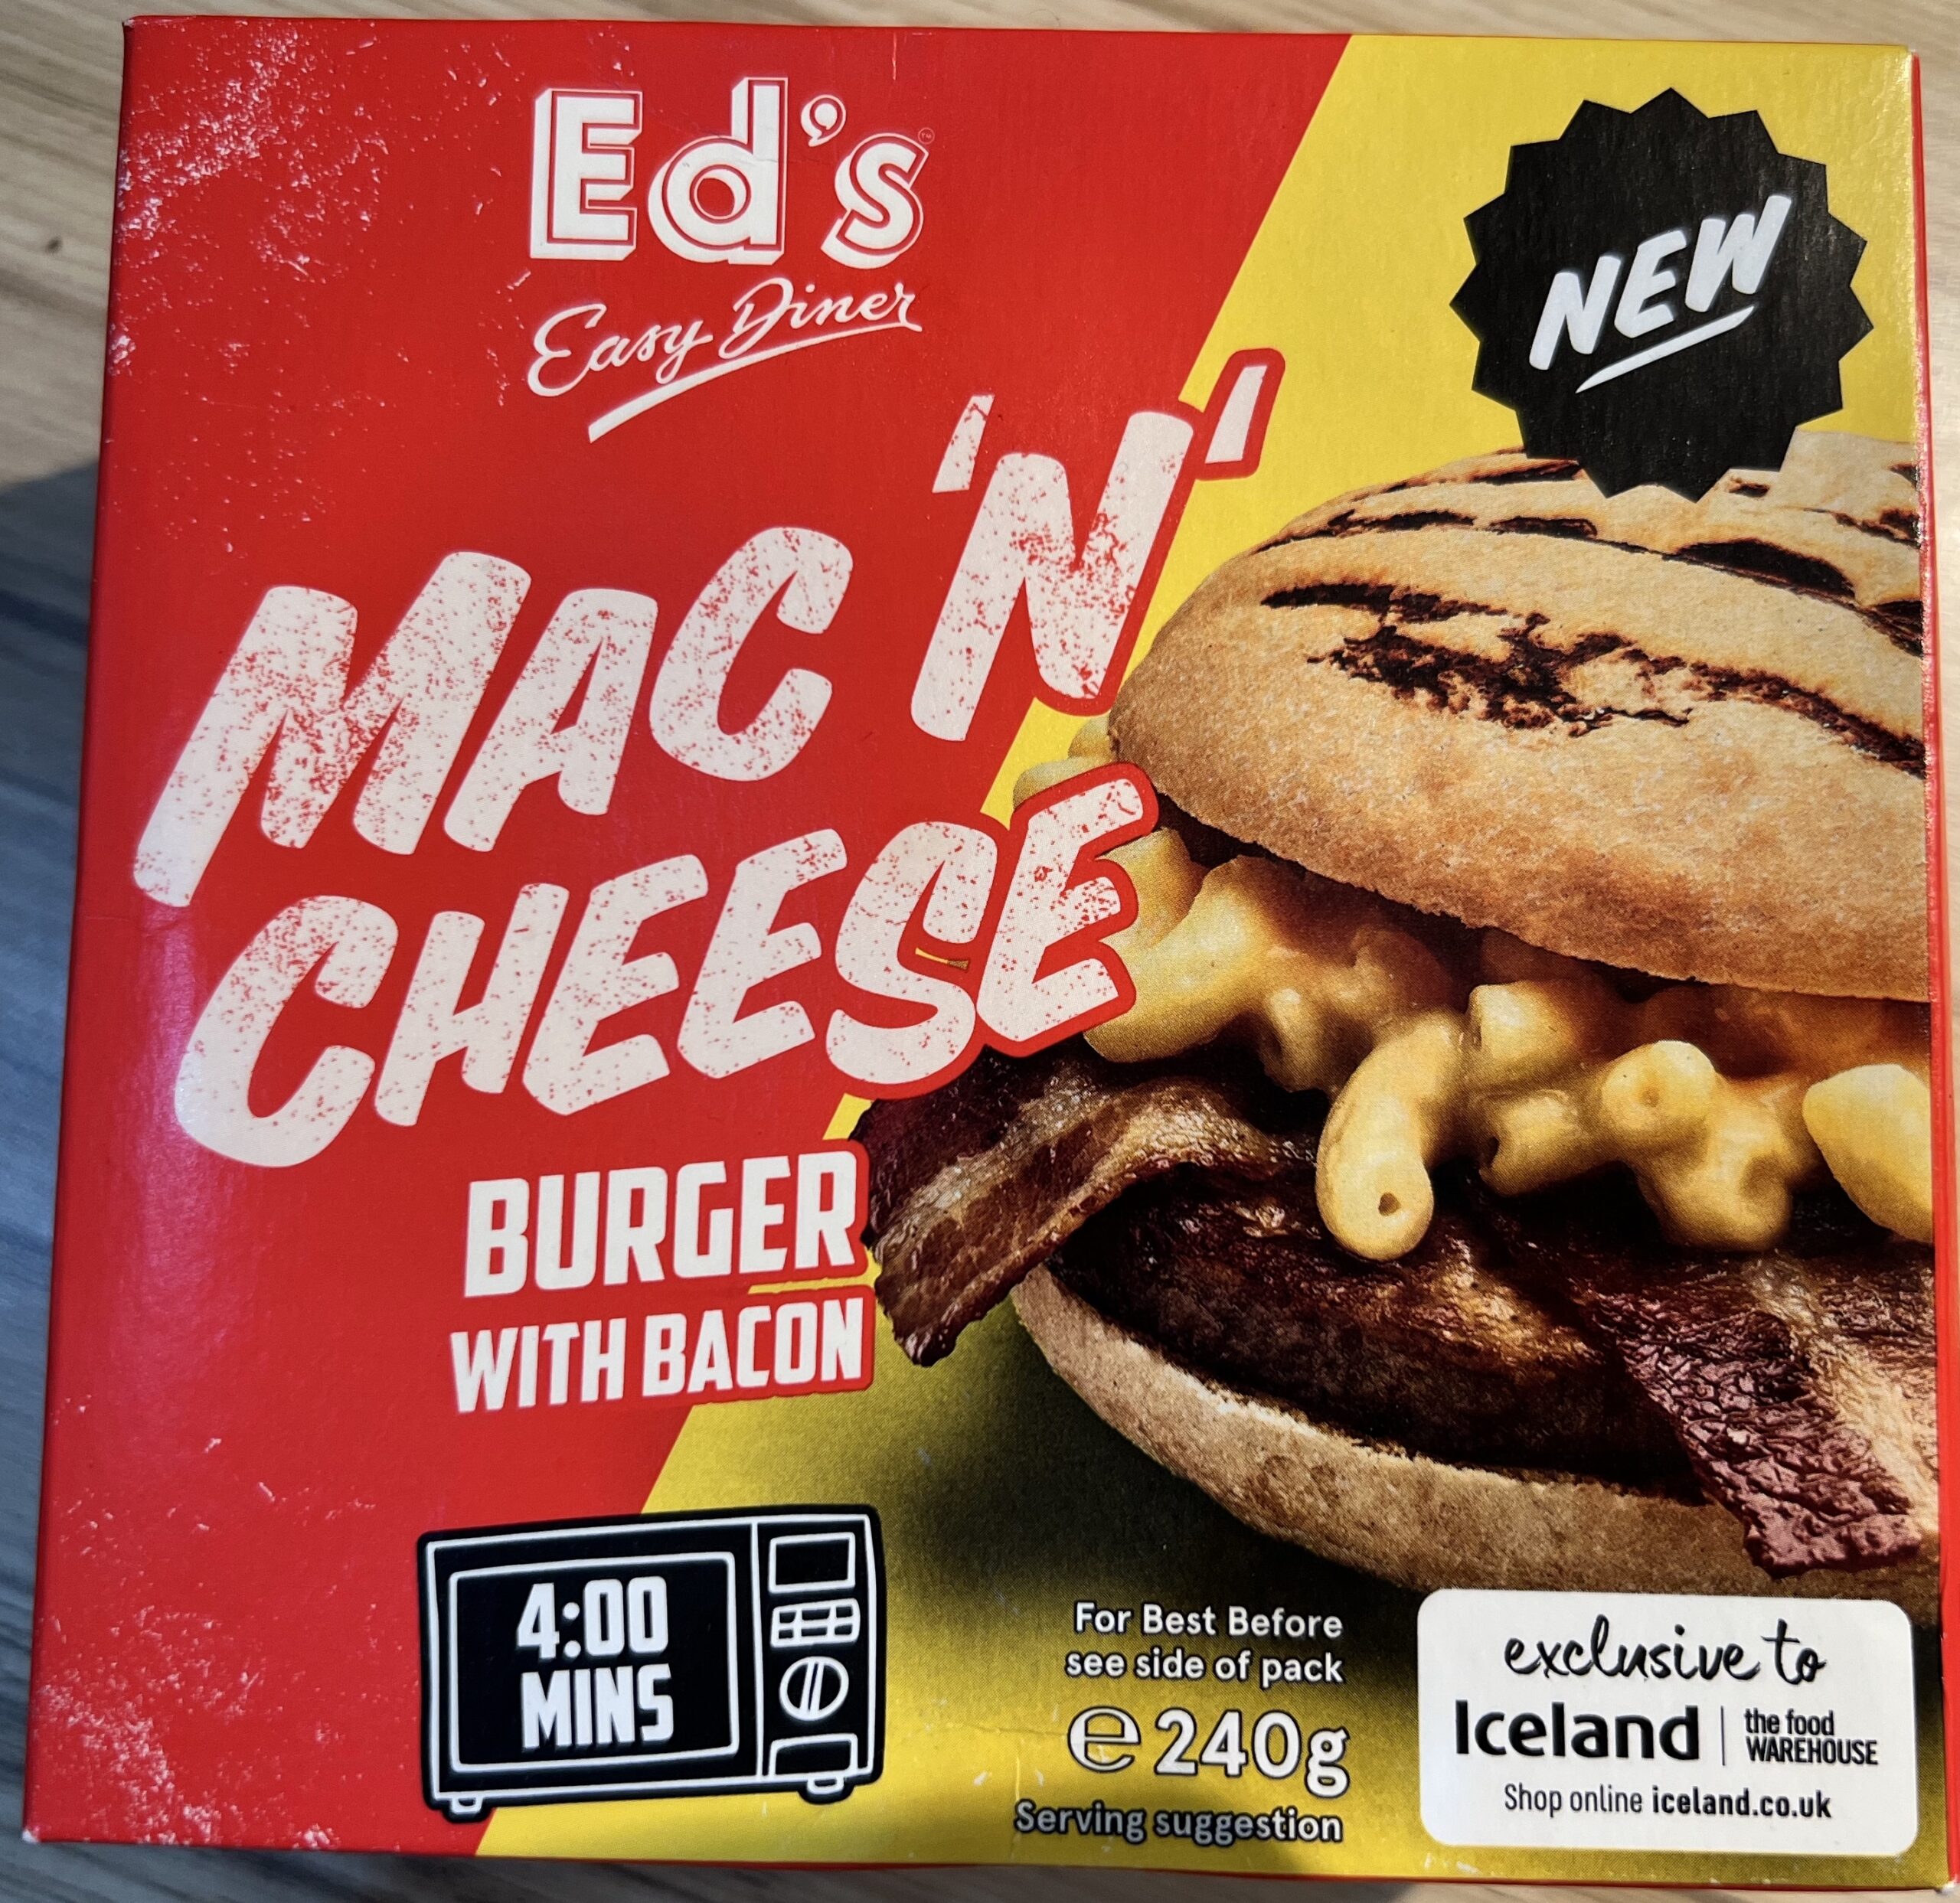 Ed's Easy Diner Mac 'n' Cheese Burger with Bacon